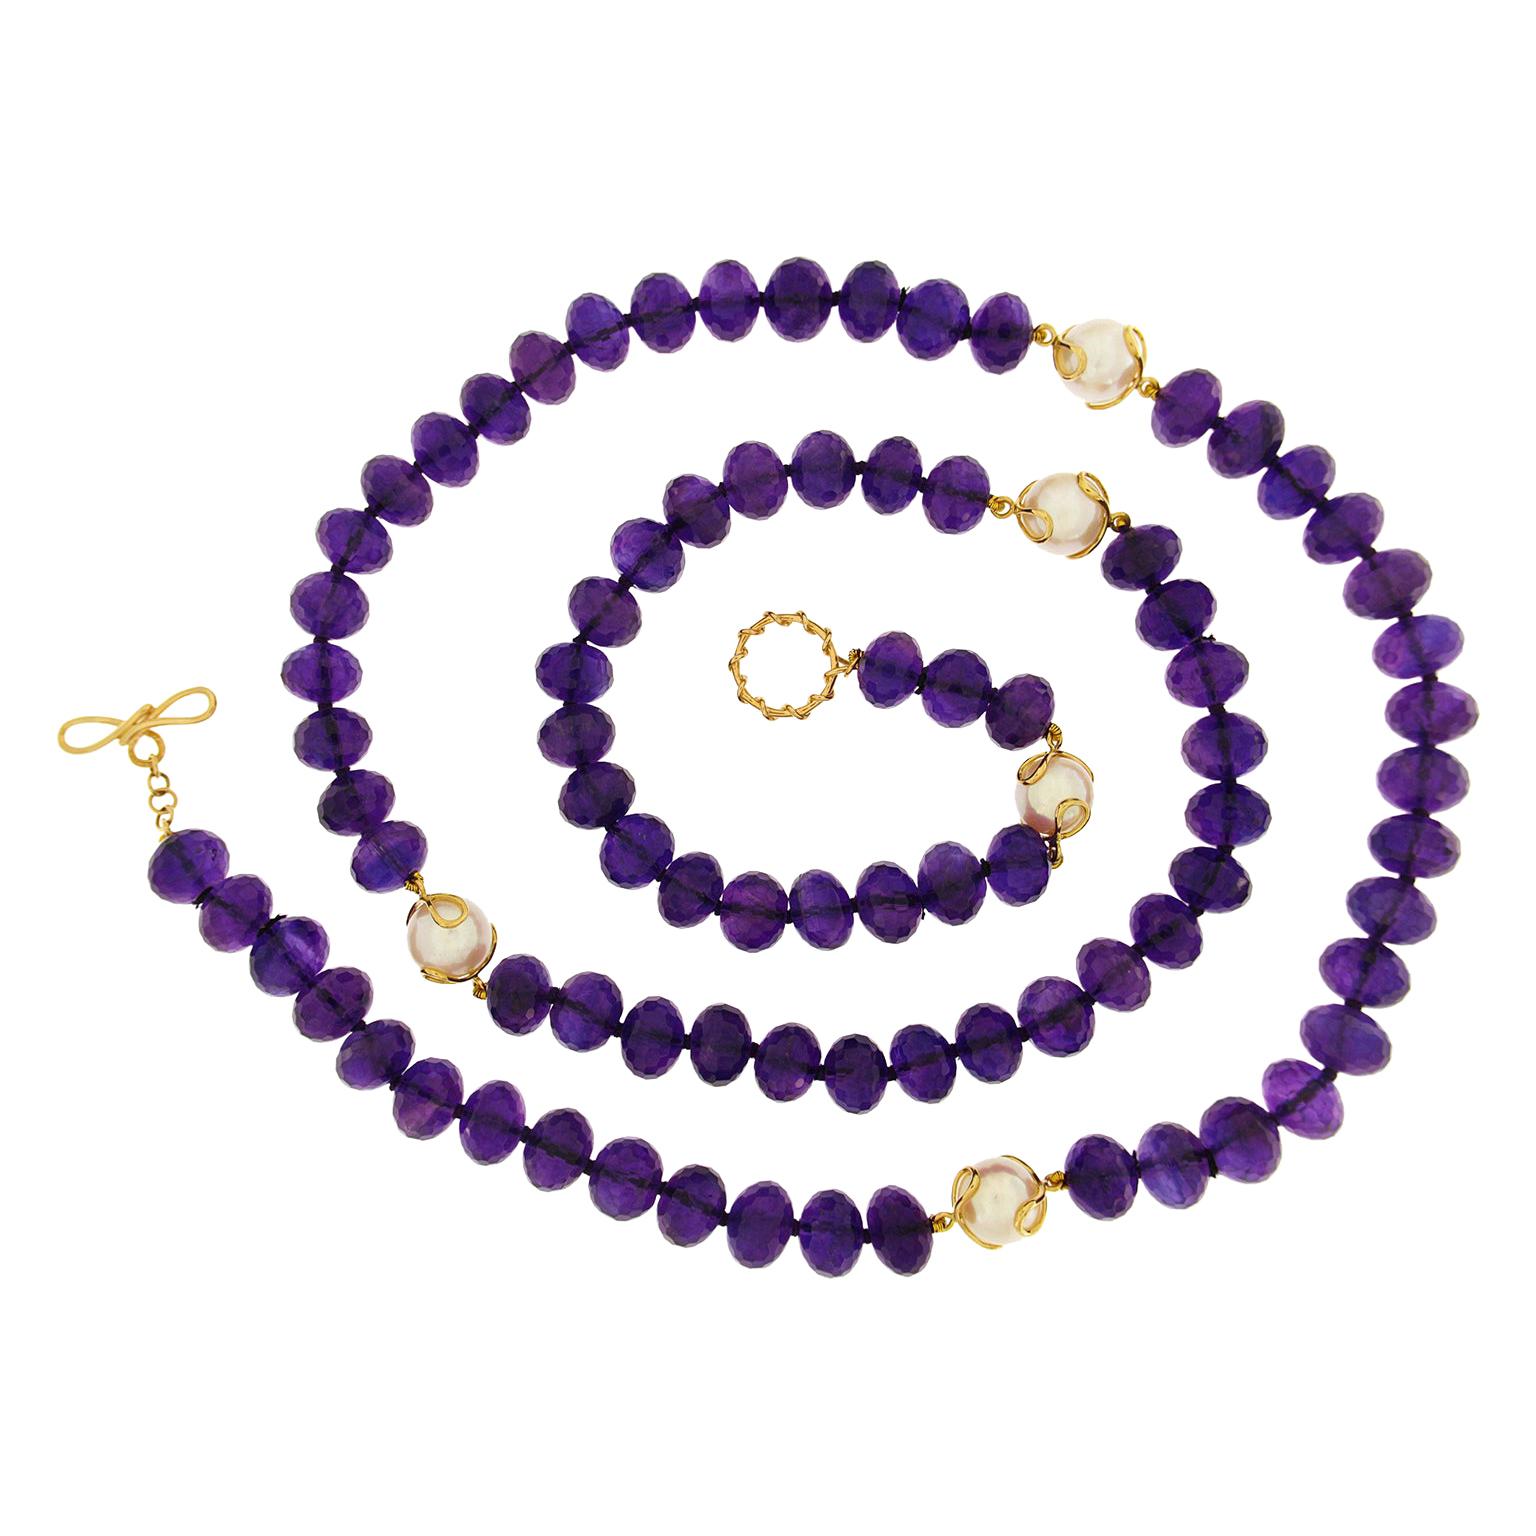 Valentin Magro Faceted Amethyst Roundelles with 5 Ciao Bella White Pearls